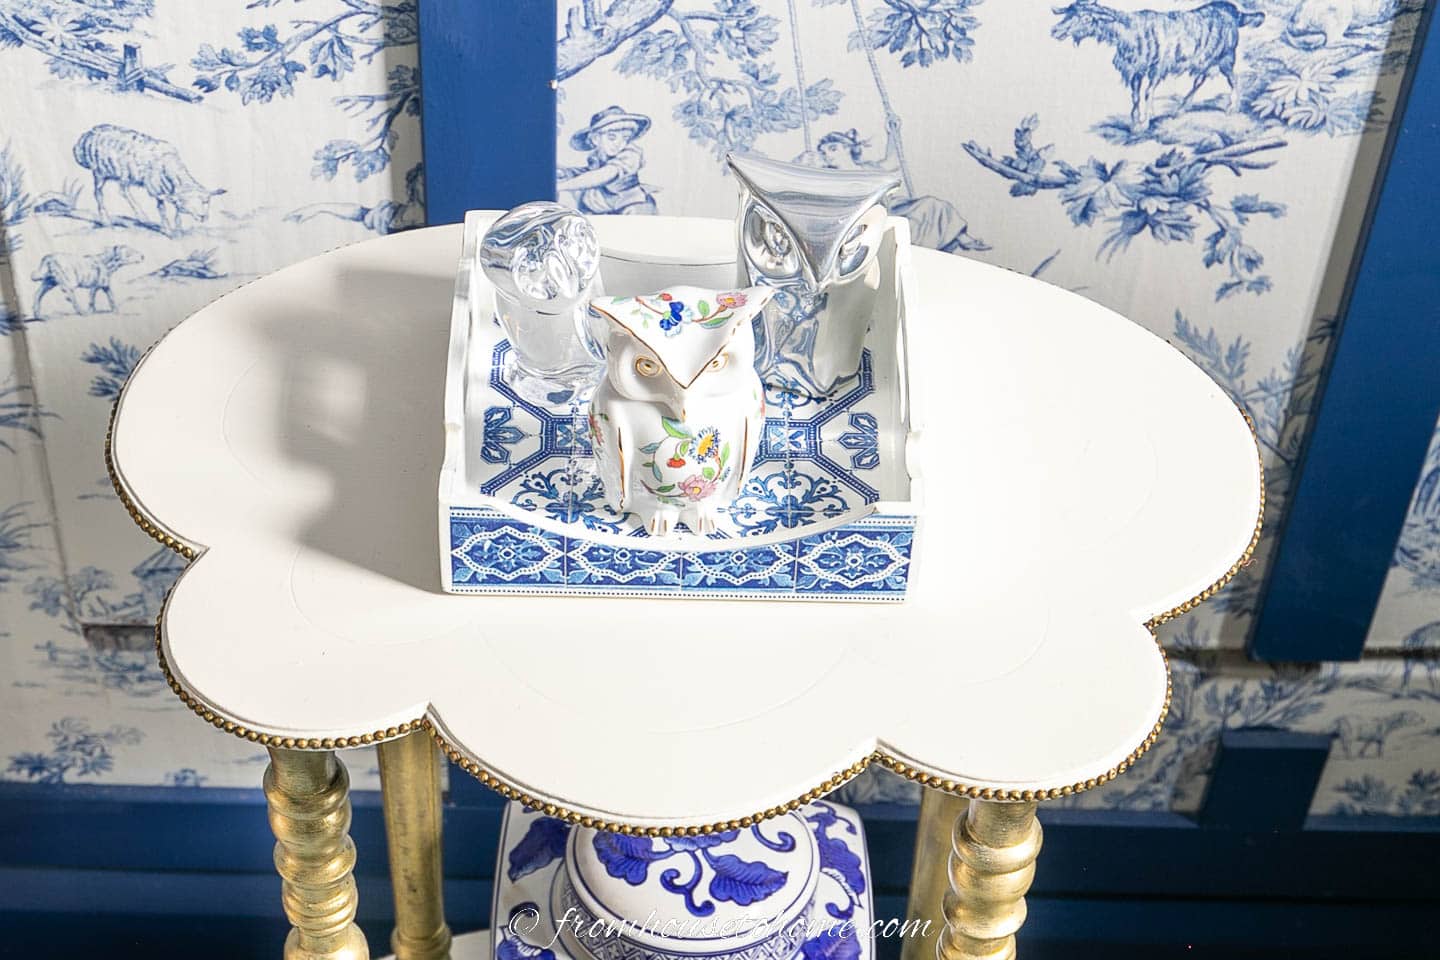 A small blue and white tray with 3 decorative owls on a small white table